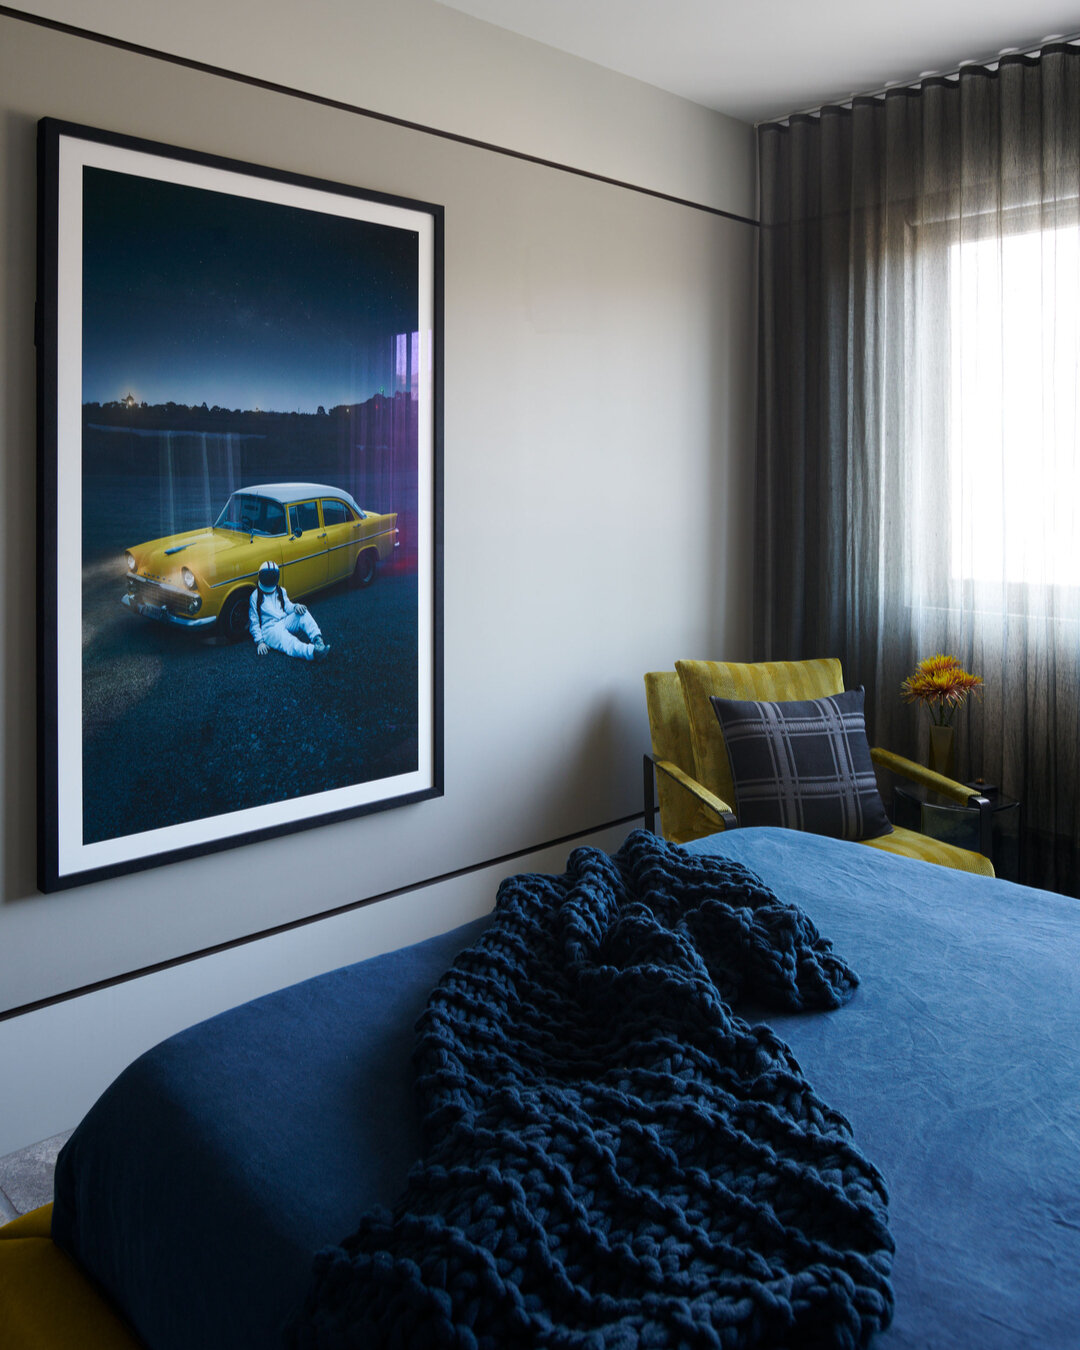 DANKS STREET, HOME &amp; STUDIO - The chartreuse upholstery of the bedhead adds a vibrant touch, echoed in the custom upholstery of the occasional chair, creating a cohesive and stylish look. An overscale photographic artwork becomes the focal point.